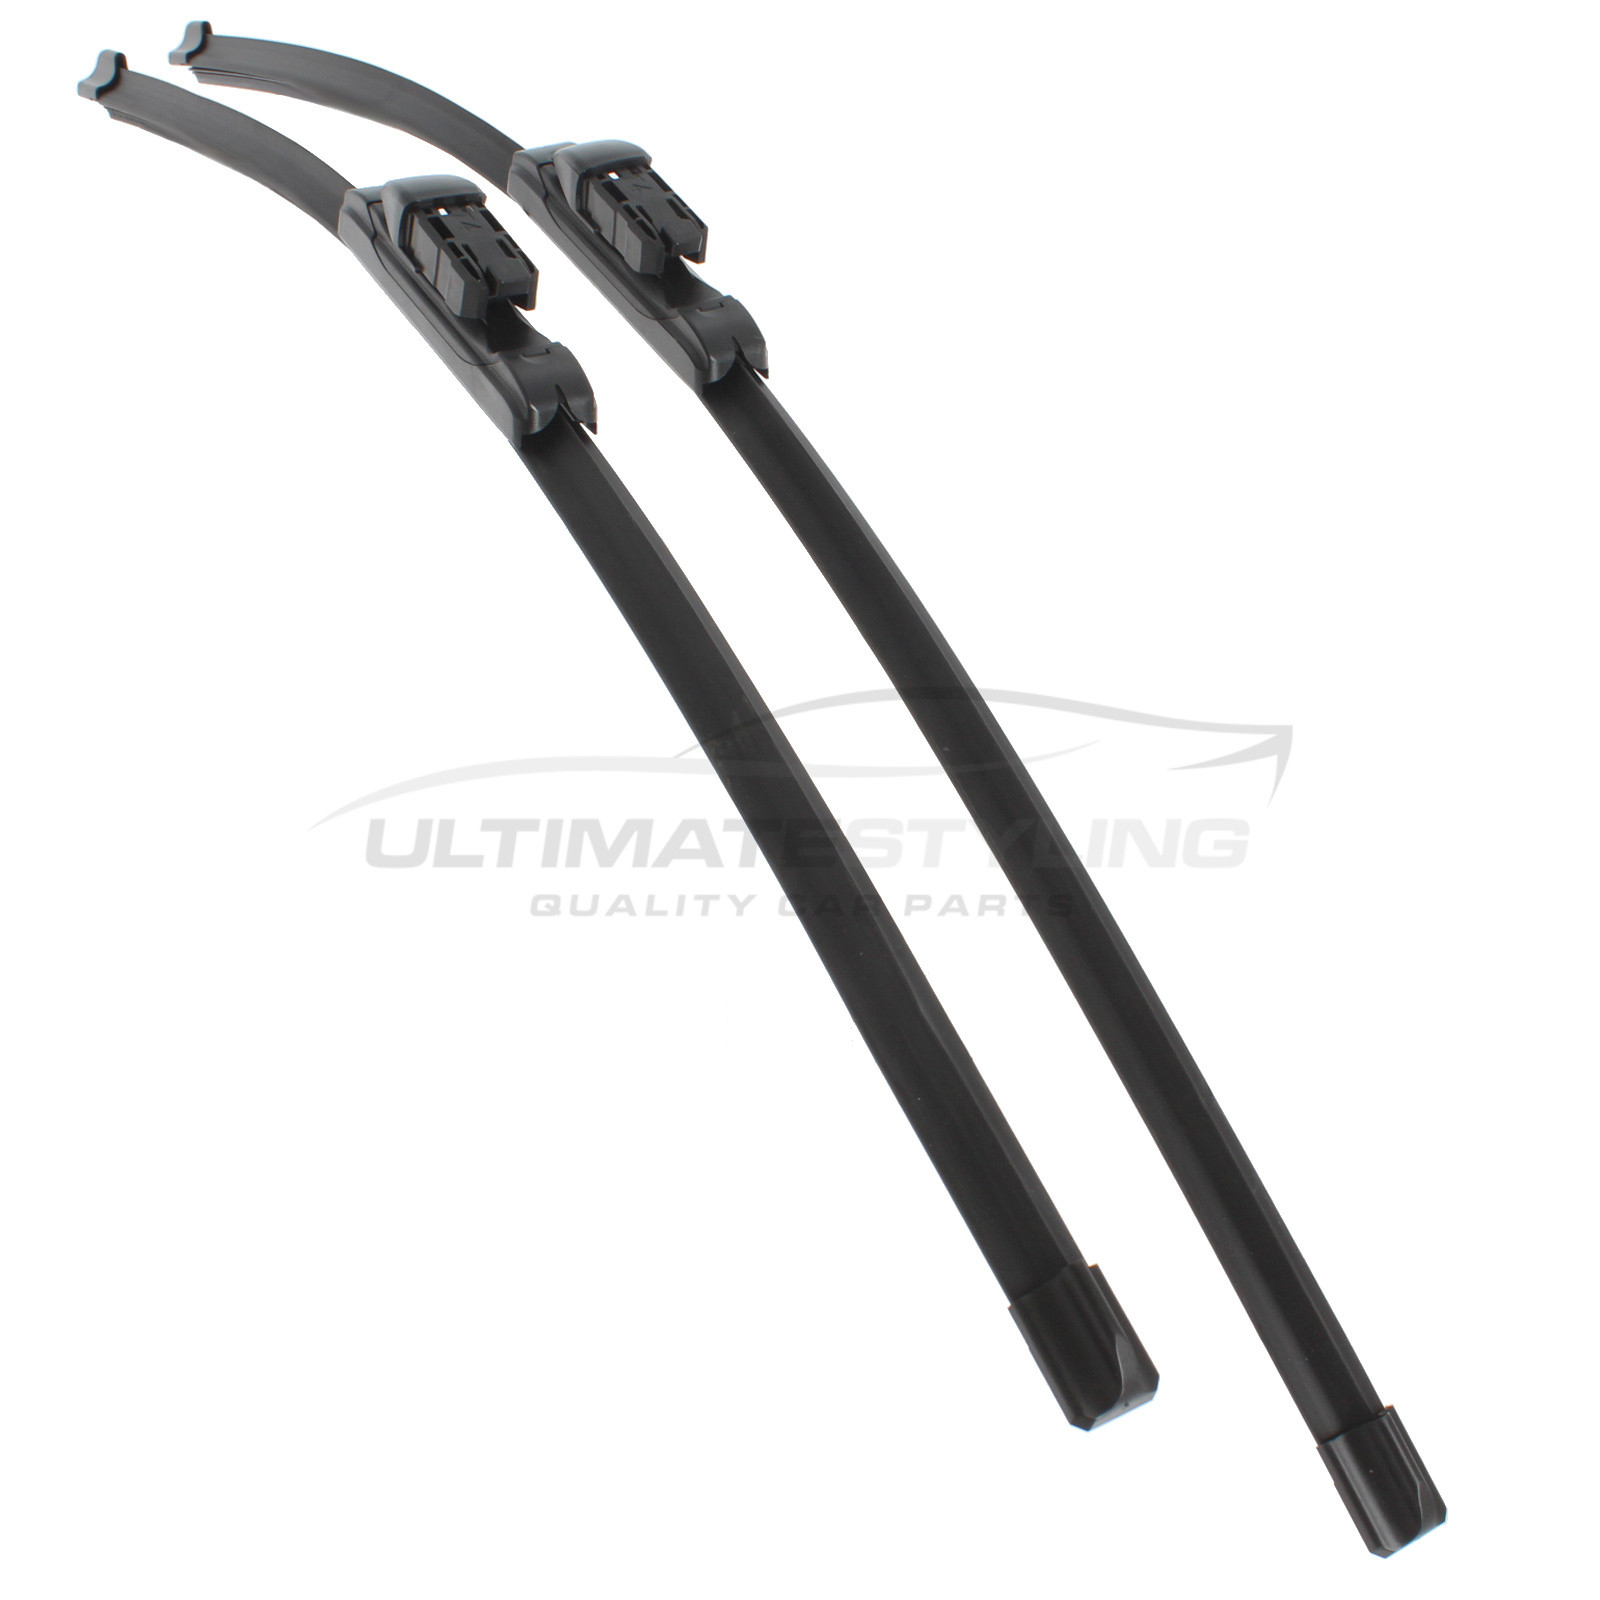 Drivers Side & Passenger Side (Front) Wiper Blades for Vauxhall Meriva